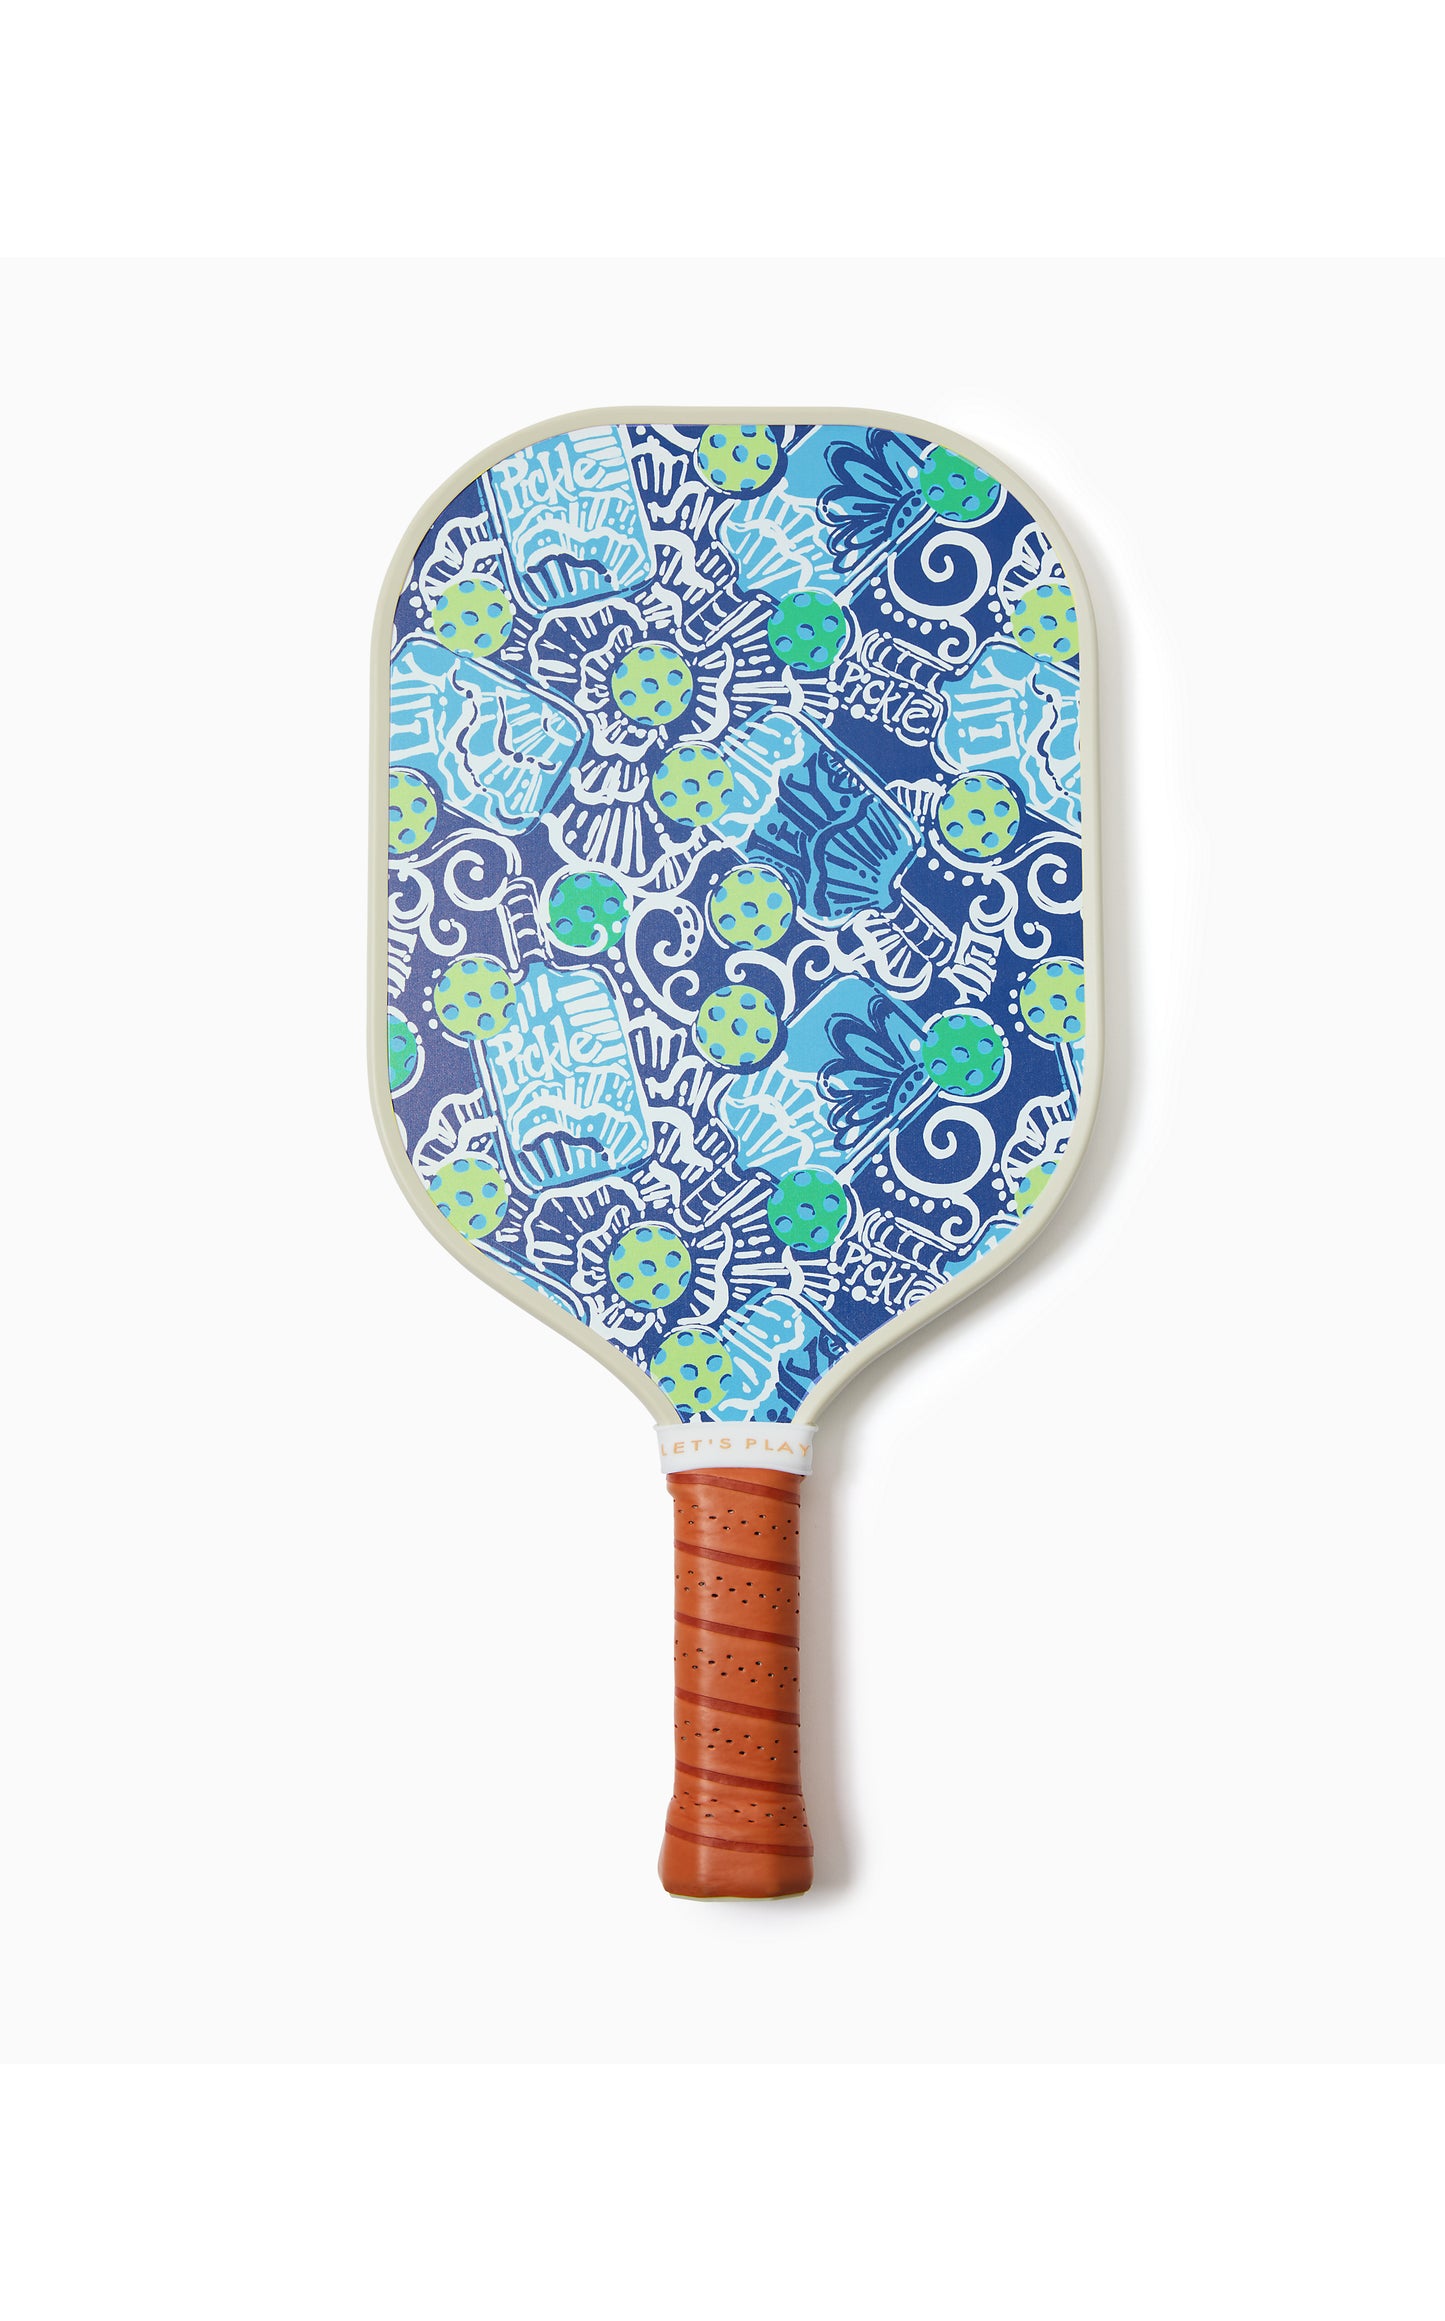 LILLY PULITZER x RECESS Pickleball Paddle in Spearmint Oversized Kiss My Tulips